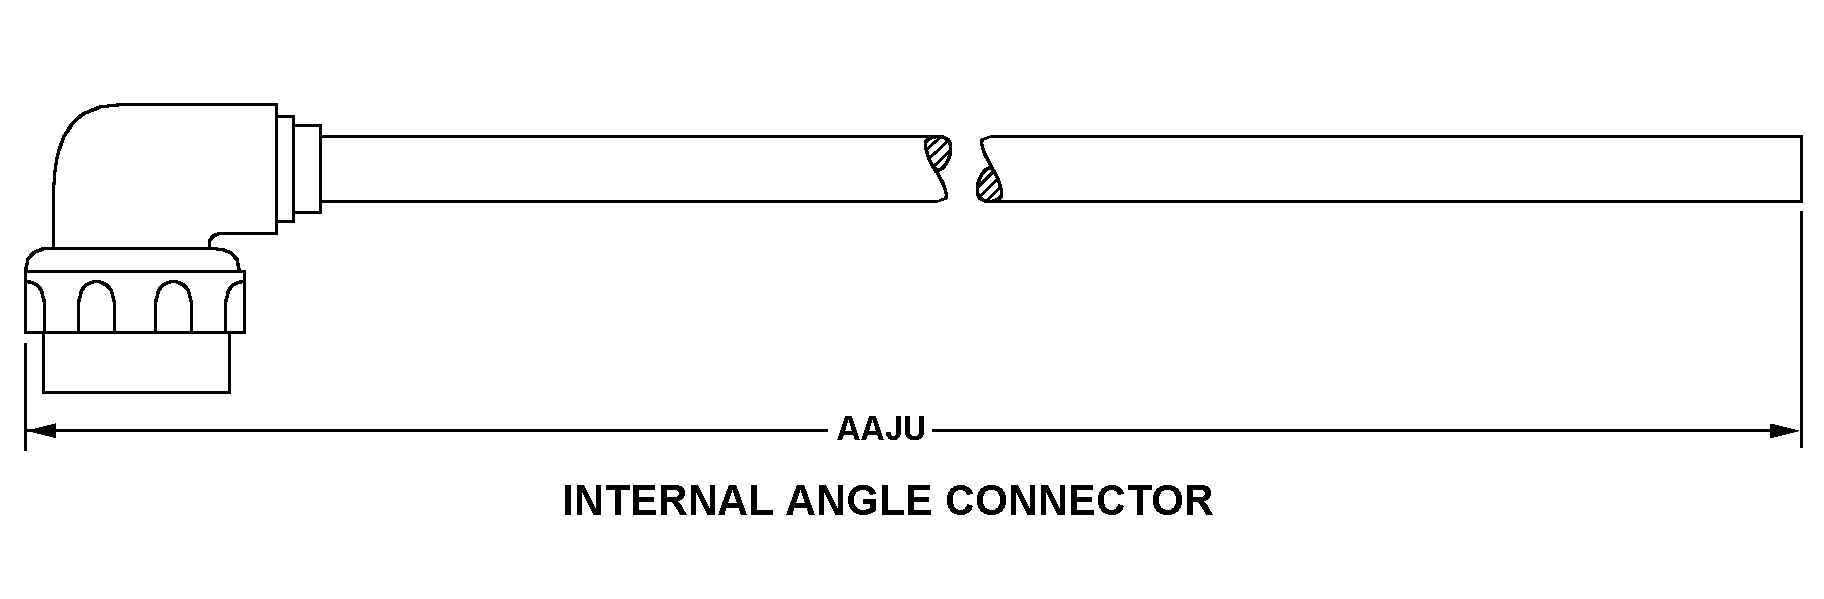 INTERNAL ANGLE CONNECTOR style nsn 5995-00-462-5092